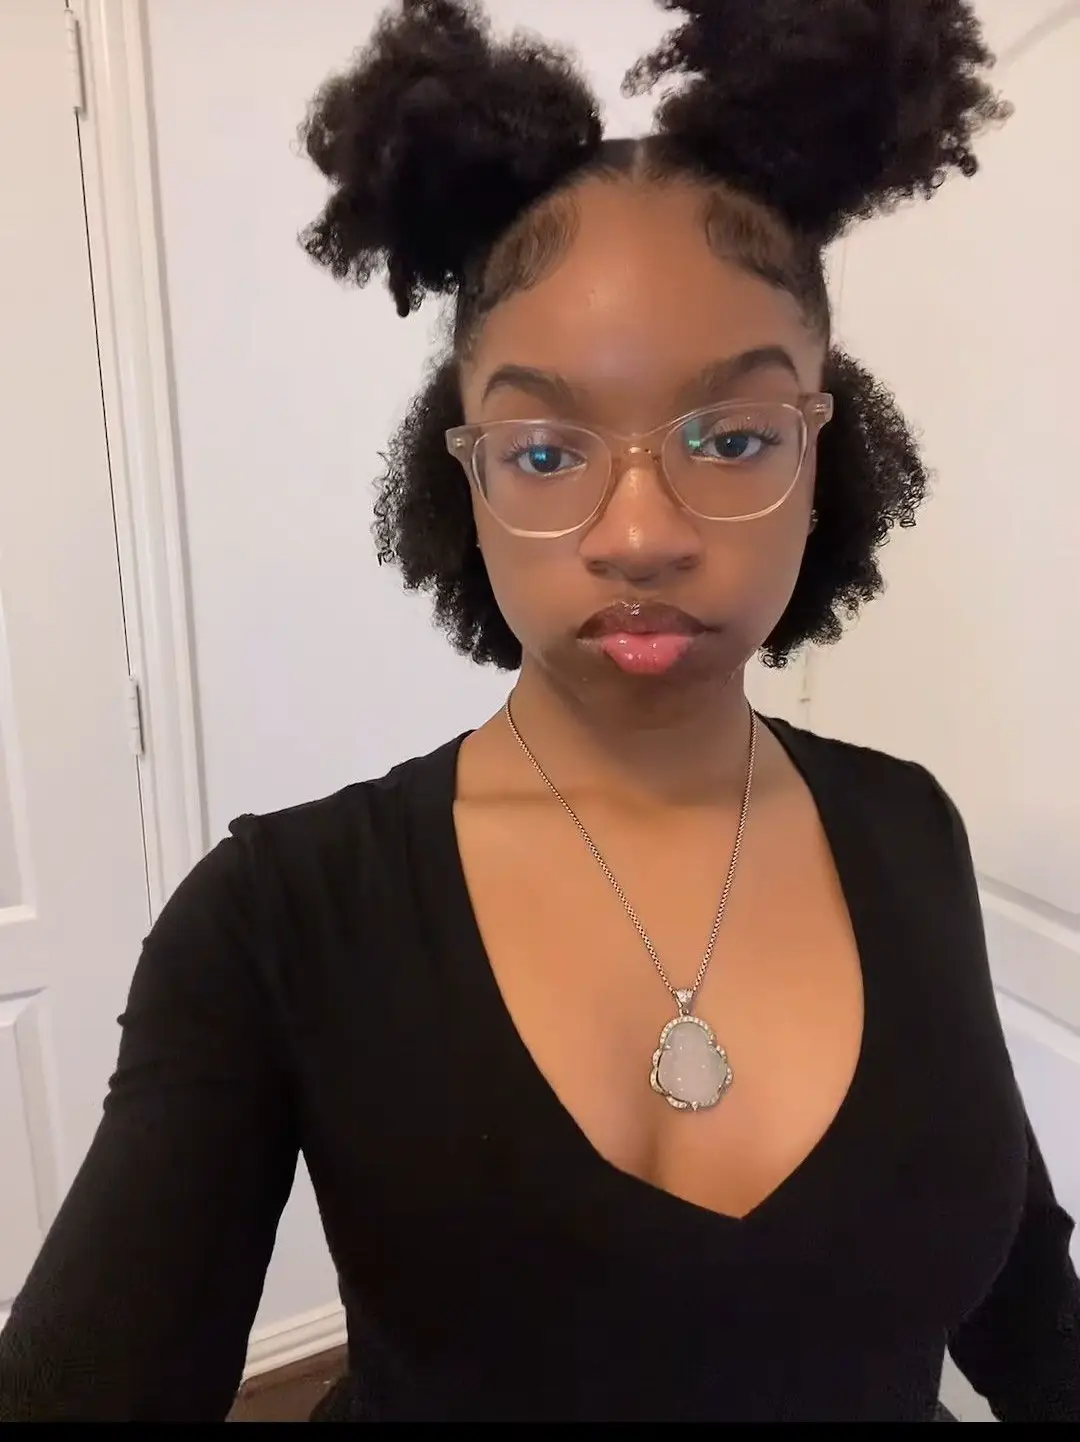 It's the $5 crochet hairstyles for me 🙋🏾‍♀️ : r/Naturalhair